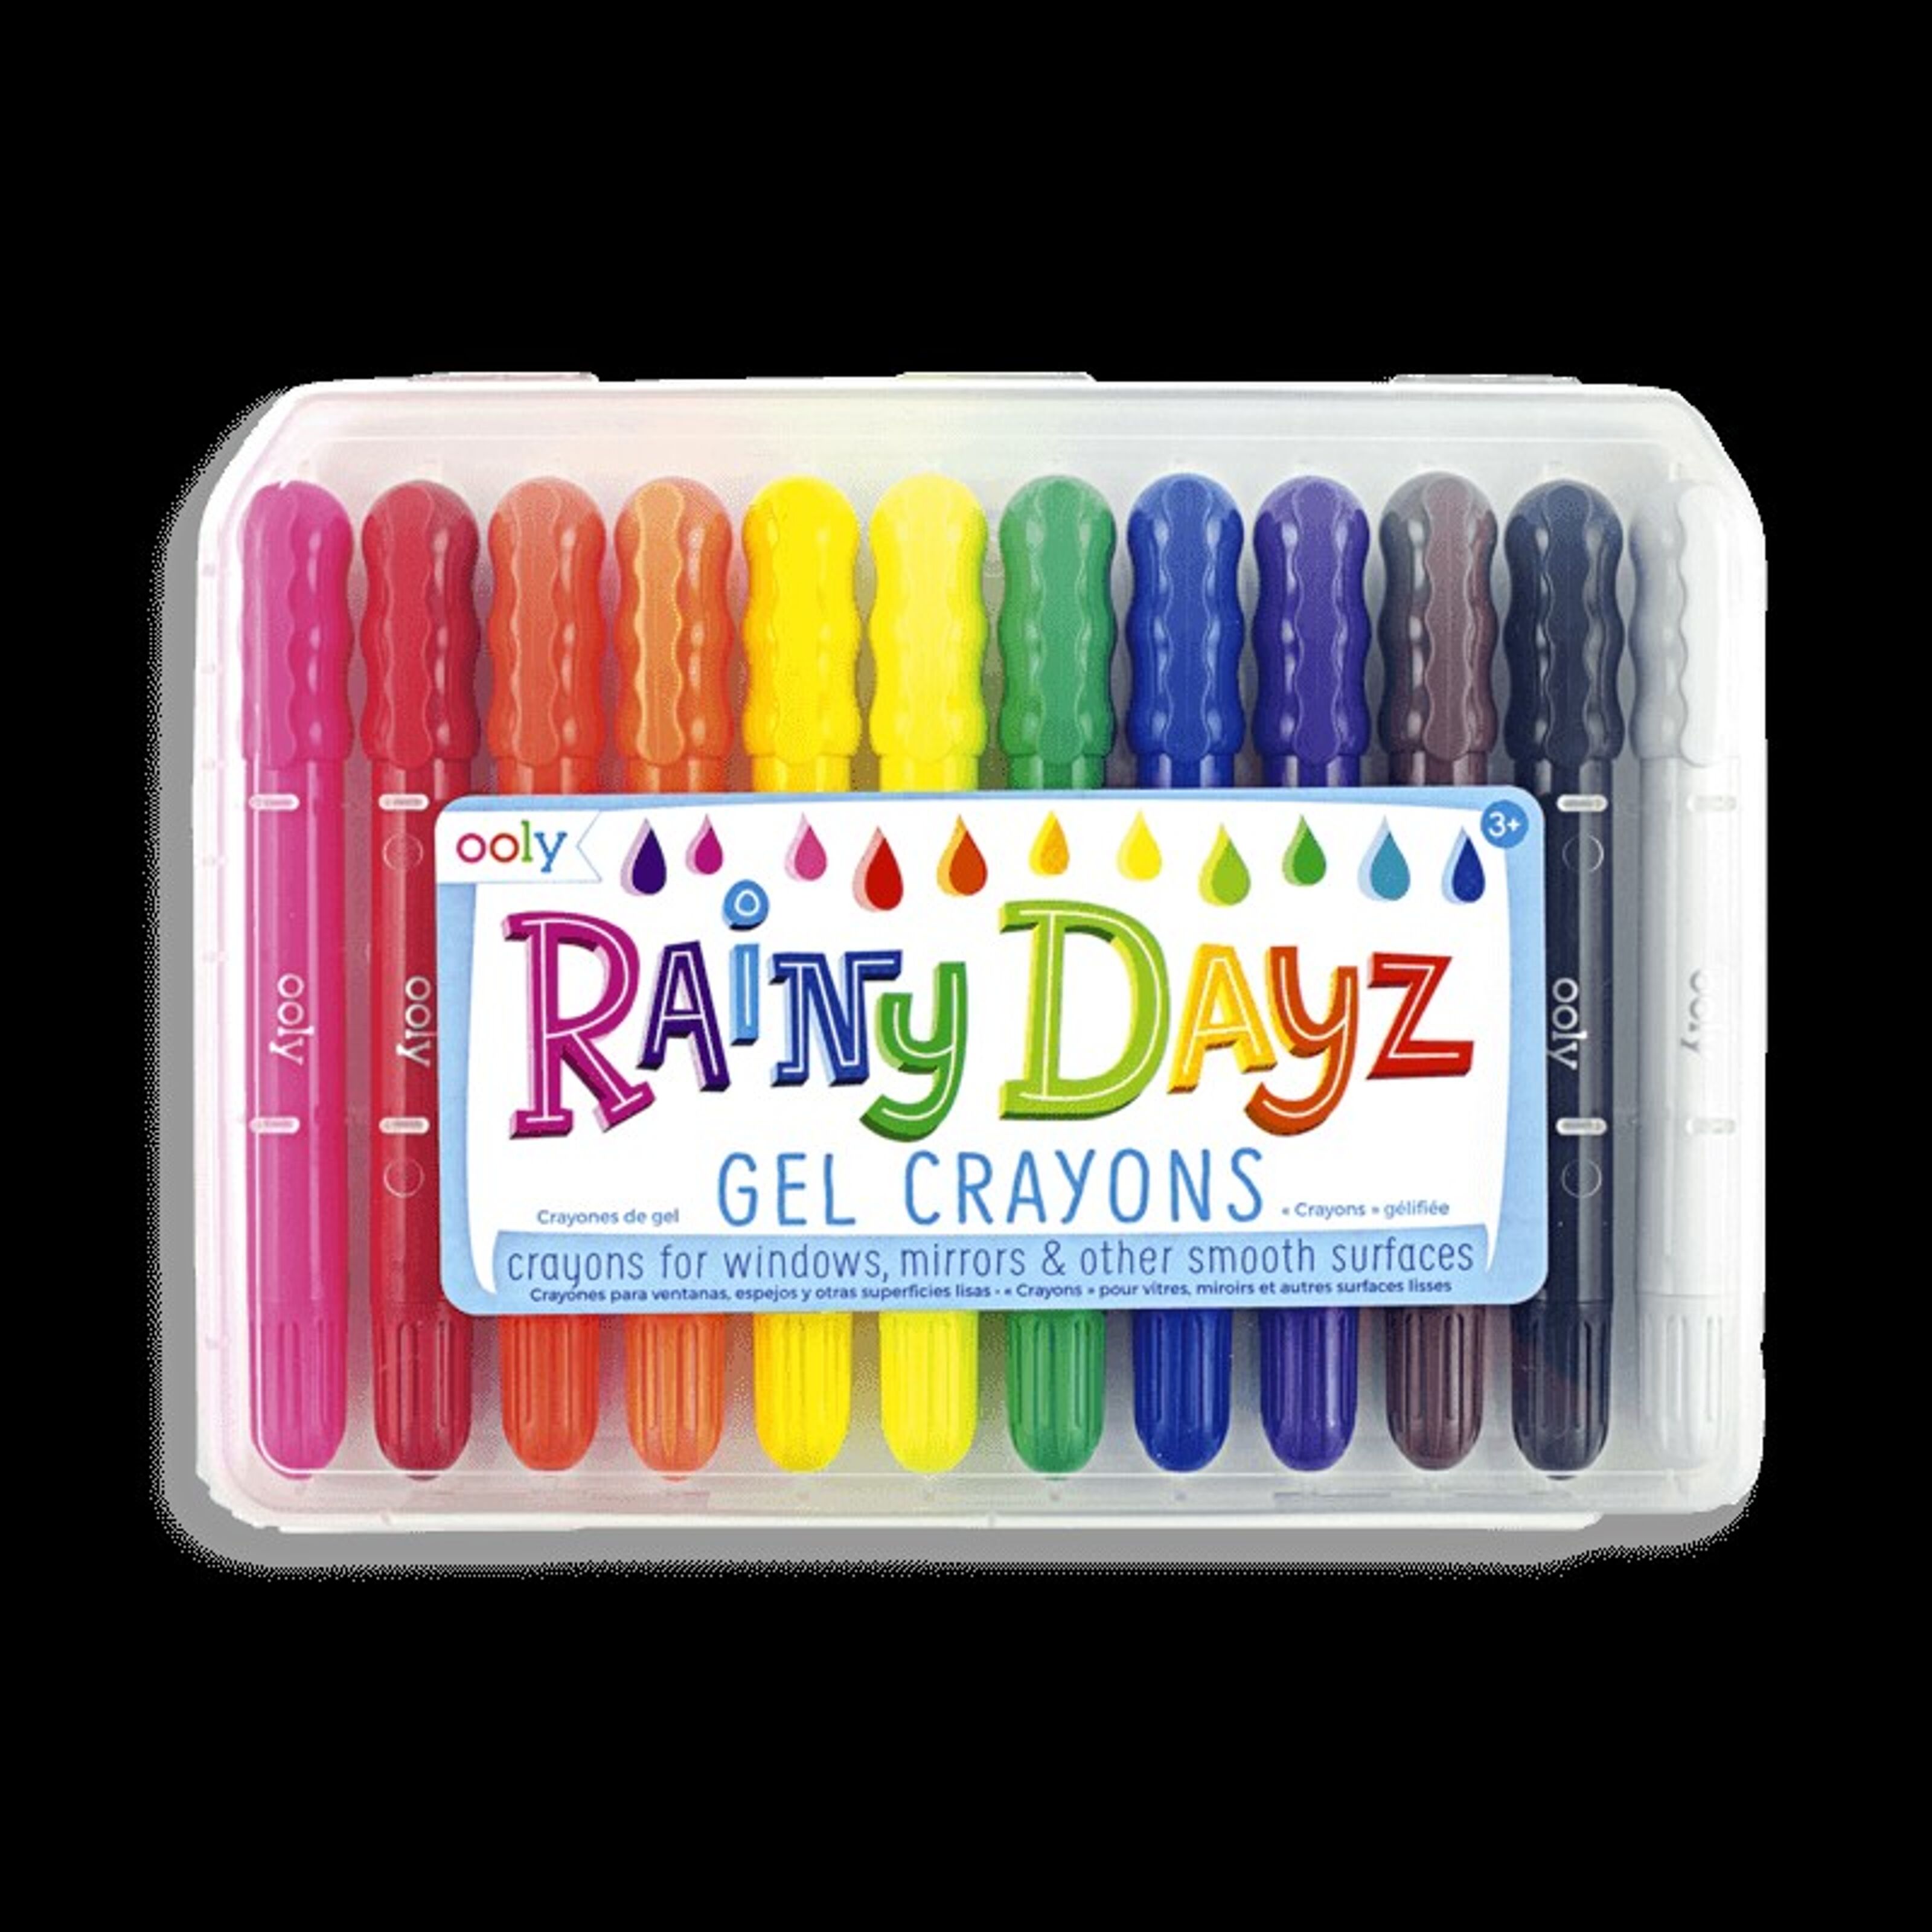 Ooly Rainy Dayz Gel Crayons for Kids and Adults - Set of 12 Rainbow Color  Crayons for Glass and Paper Surfaces with Clear Plastic Crayon Case for  Easy